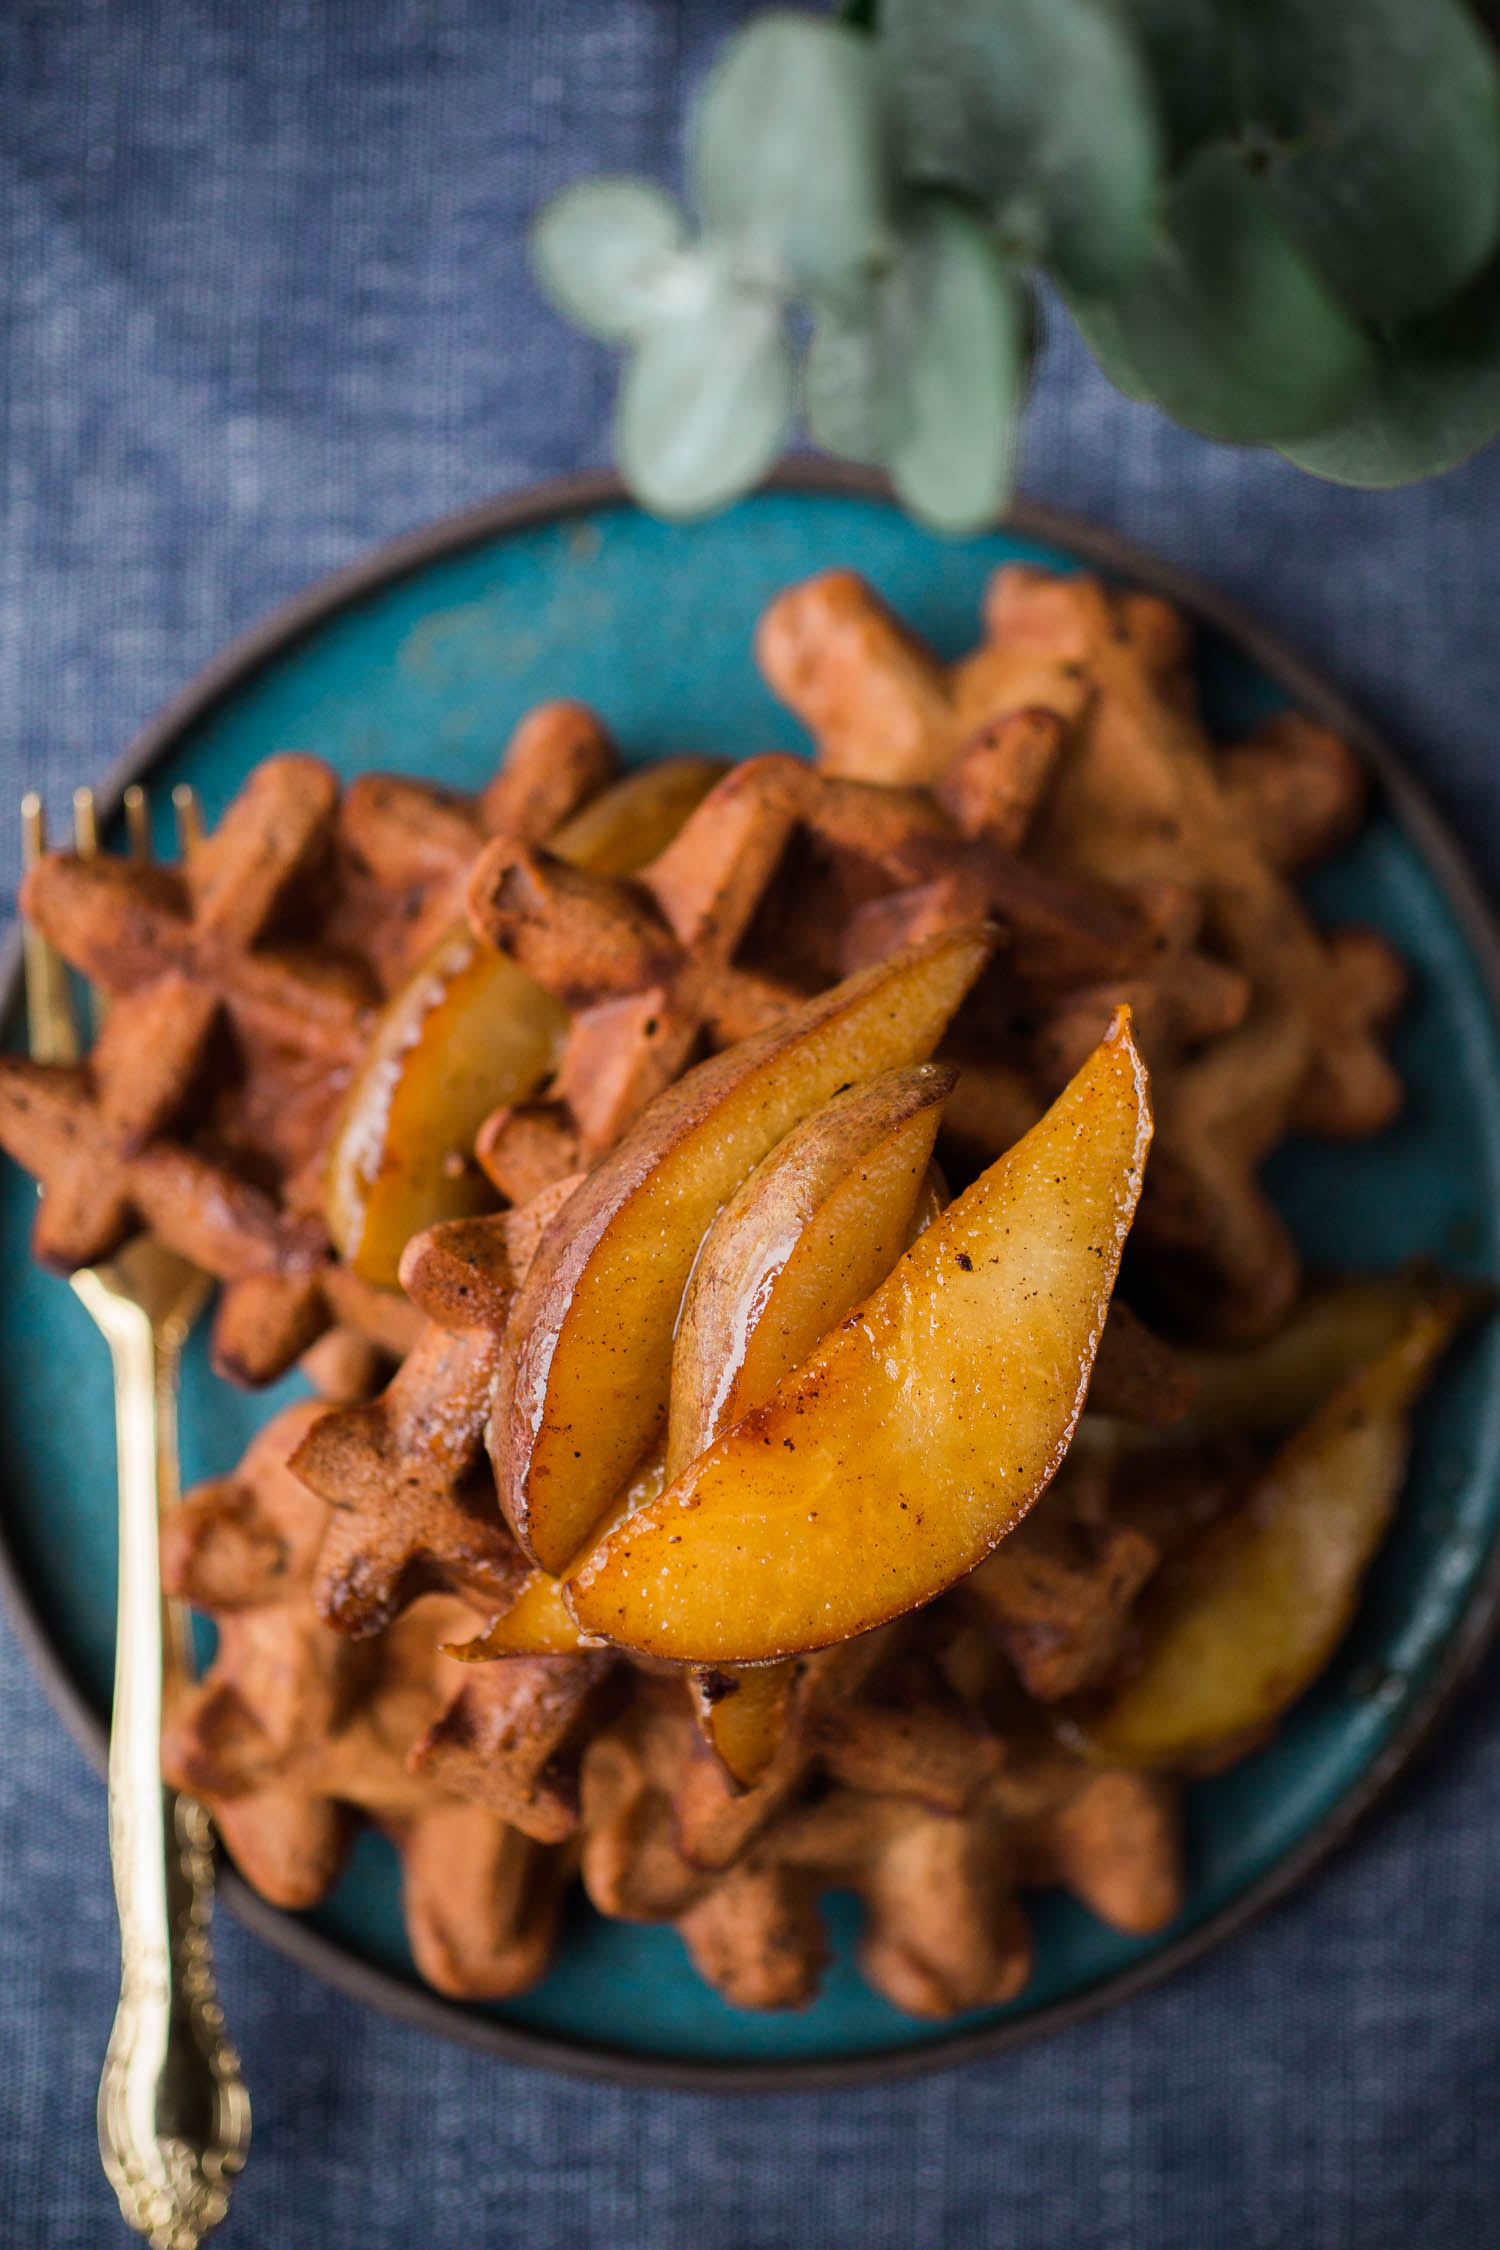 Vegan Cocoa Waffles With Caramelized Pears